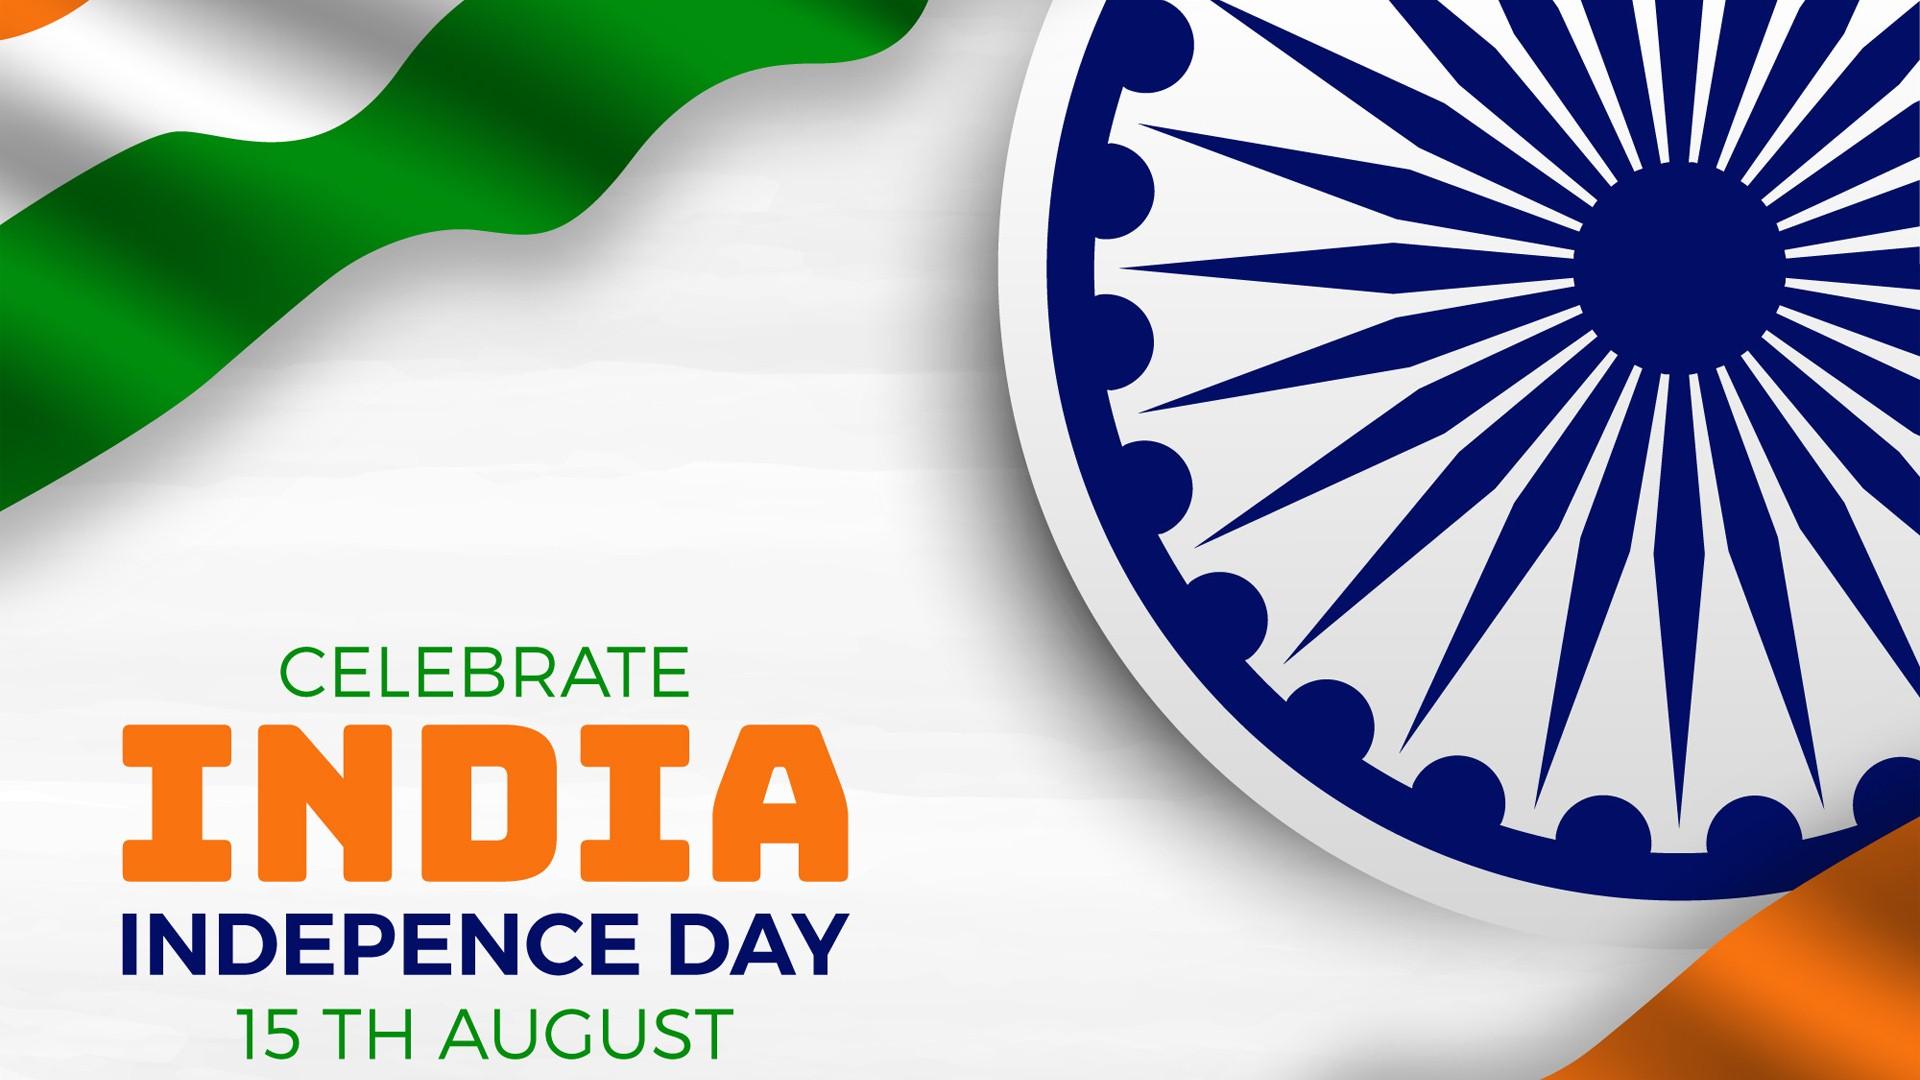 Independence Day Wallpapers | Free Download HD Holidays Desktop Images